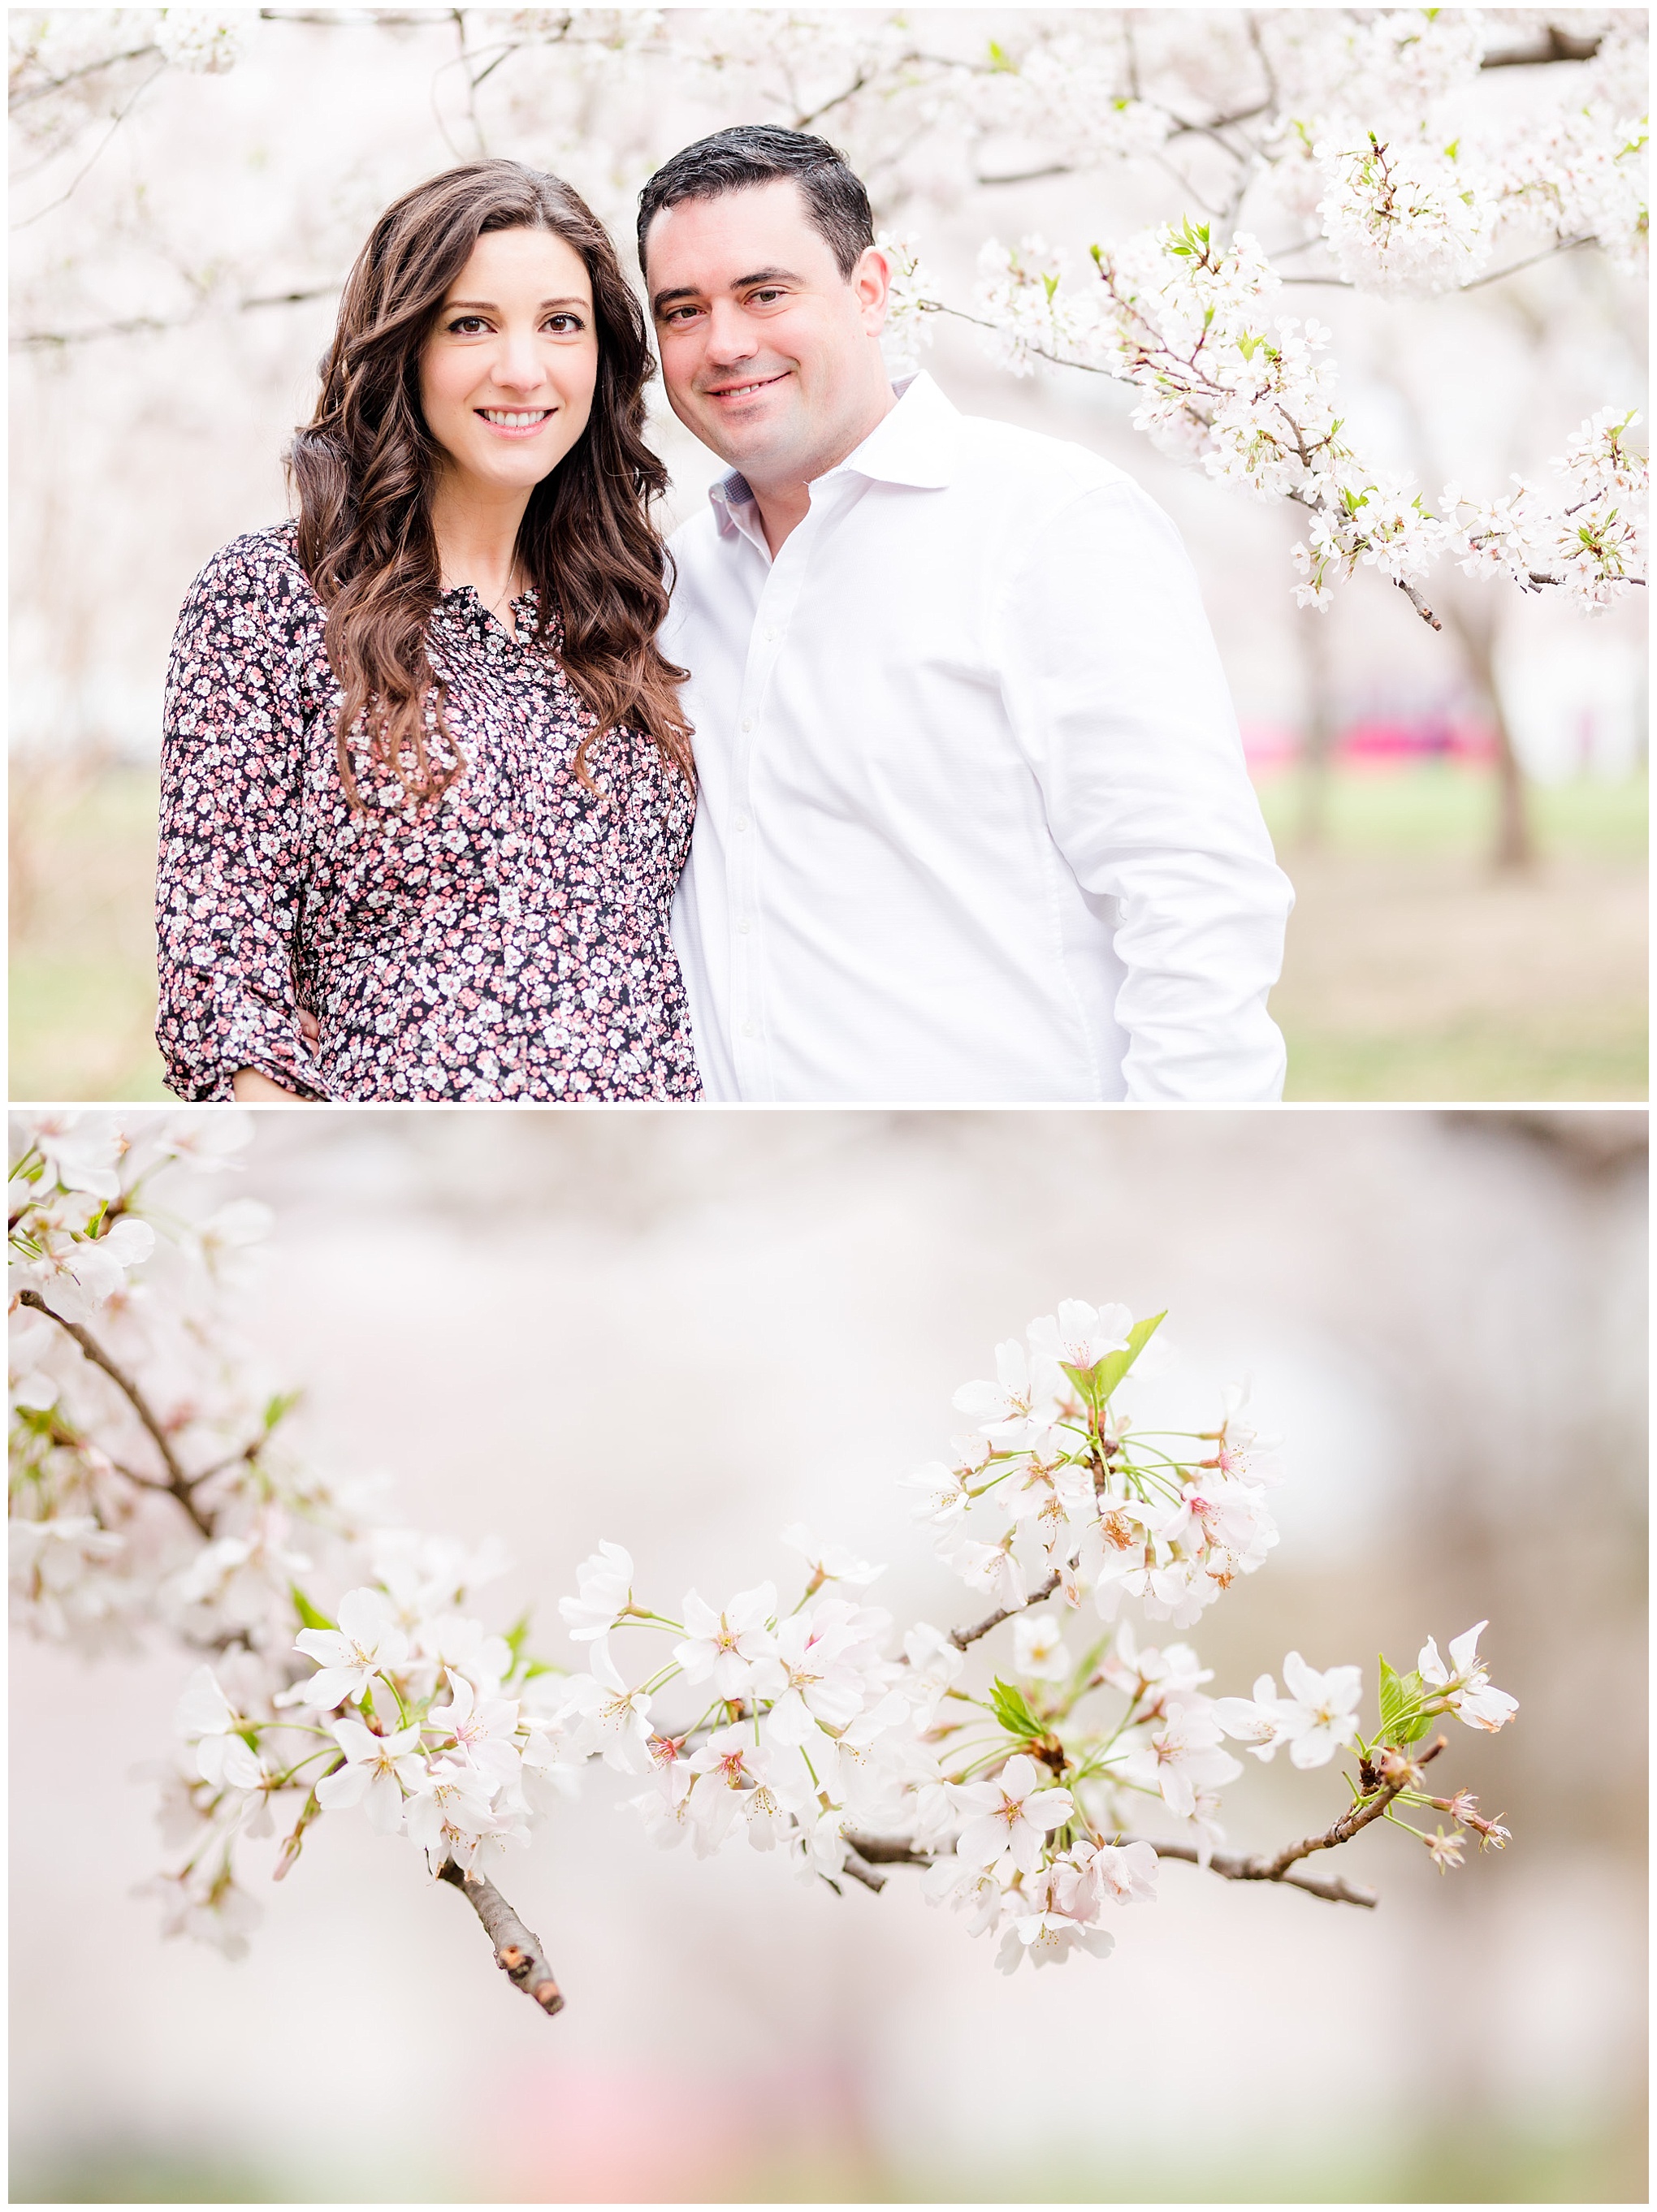 D.C. cherry blossoms maternity session, maternity portraits, maternity photos, D.C. cherry blossoms, cherry blossoms maternity photo, floral print top, brunette expectant mom, expecting mother, brunette woman, pregnant woman, third trimester, baby bump, couple smiling